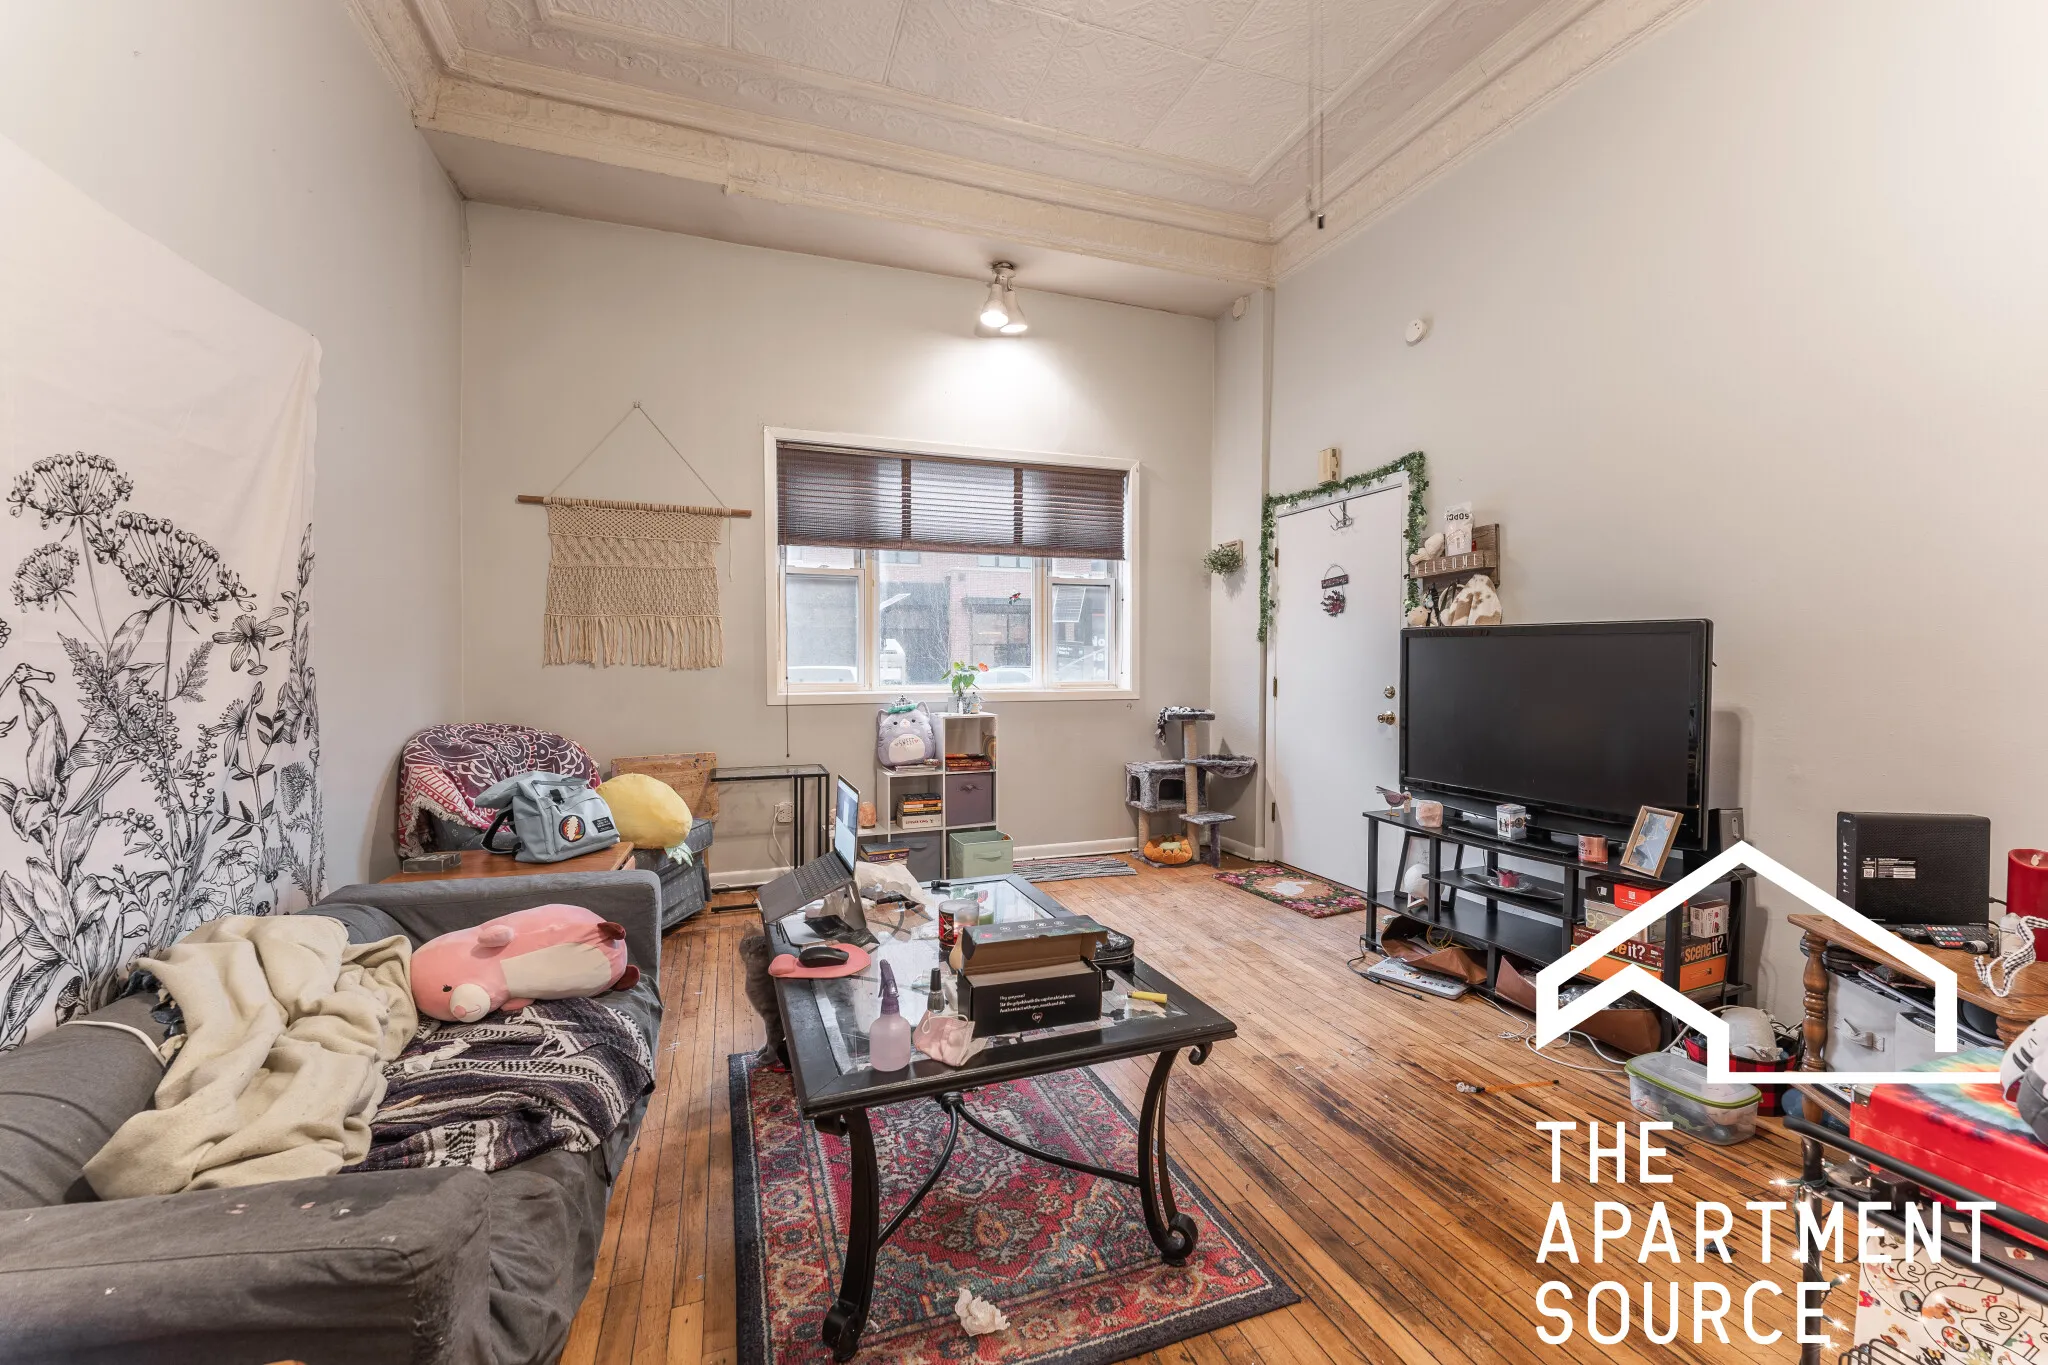 3151 N SOUTHPORT AVE 60657-unit#1-F-Chicago-IL